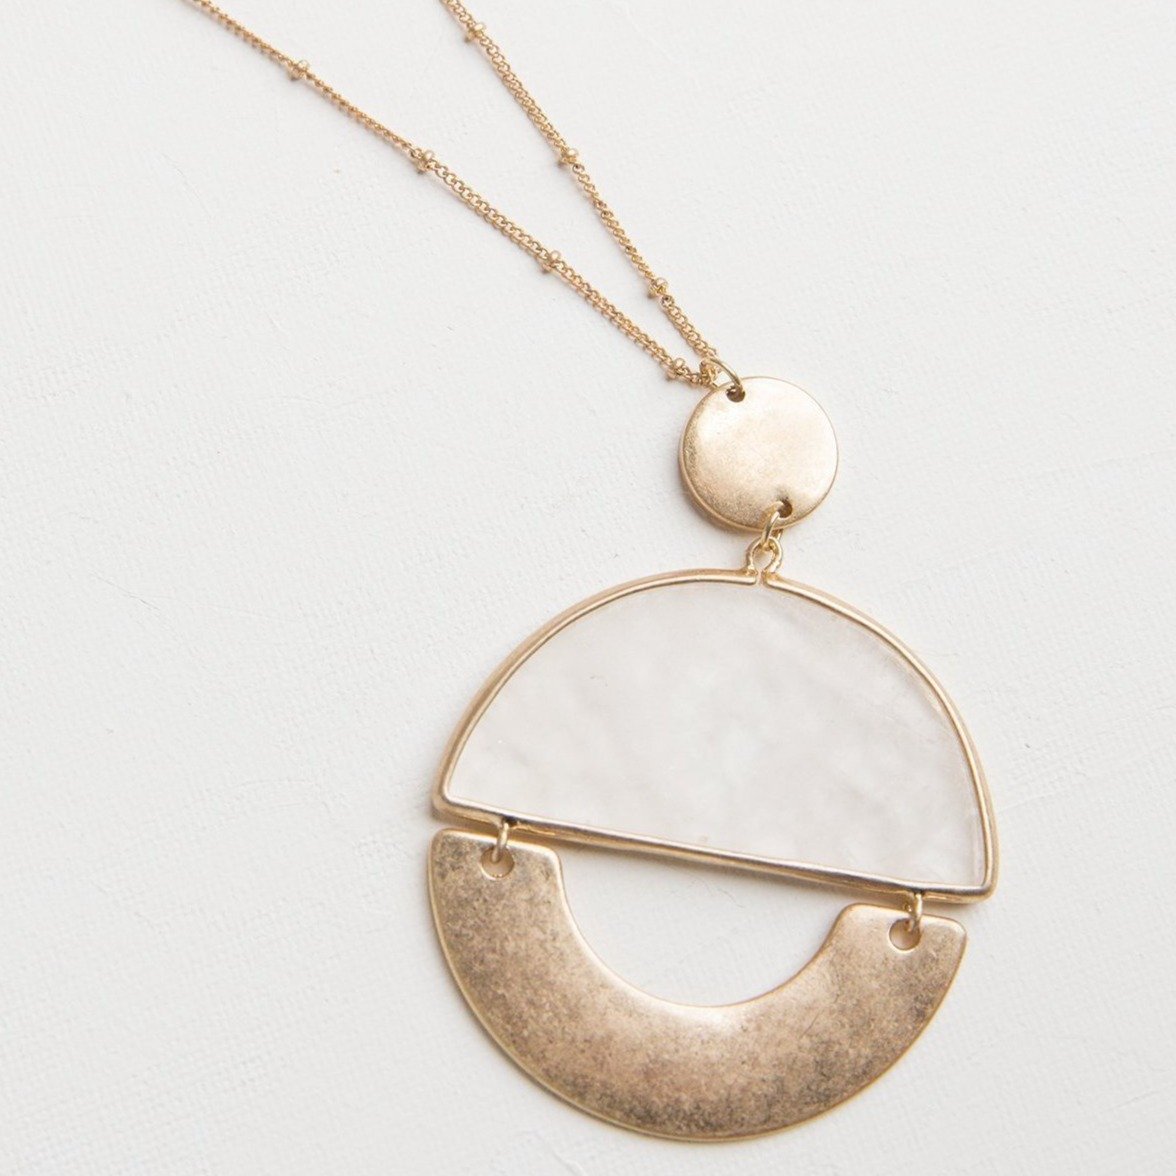 Ambient Stone Pendant Necklace - Necklaces at Beyond Polish